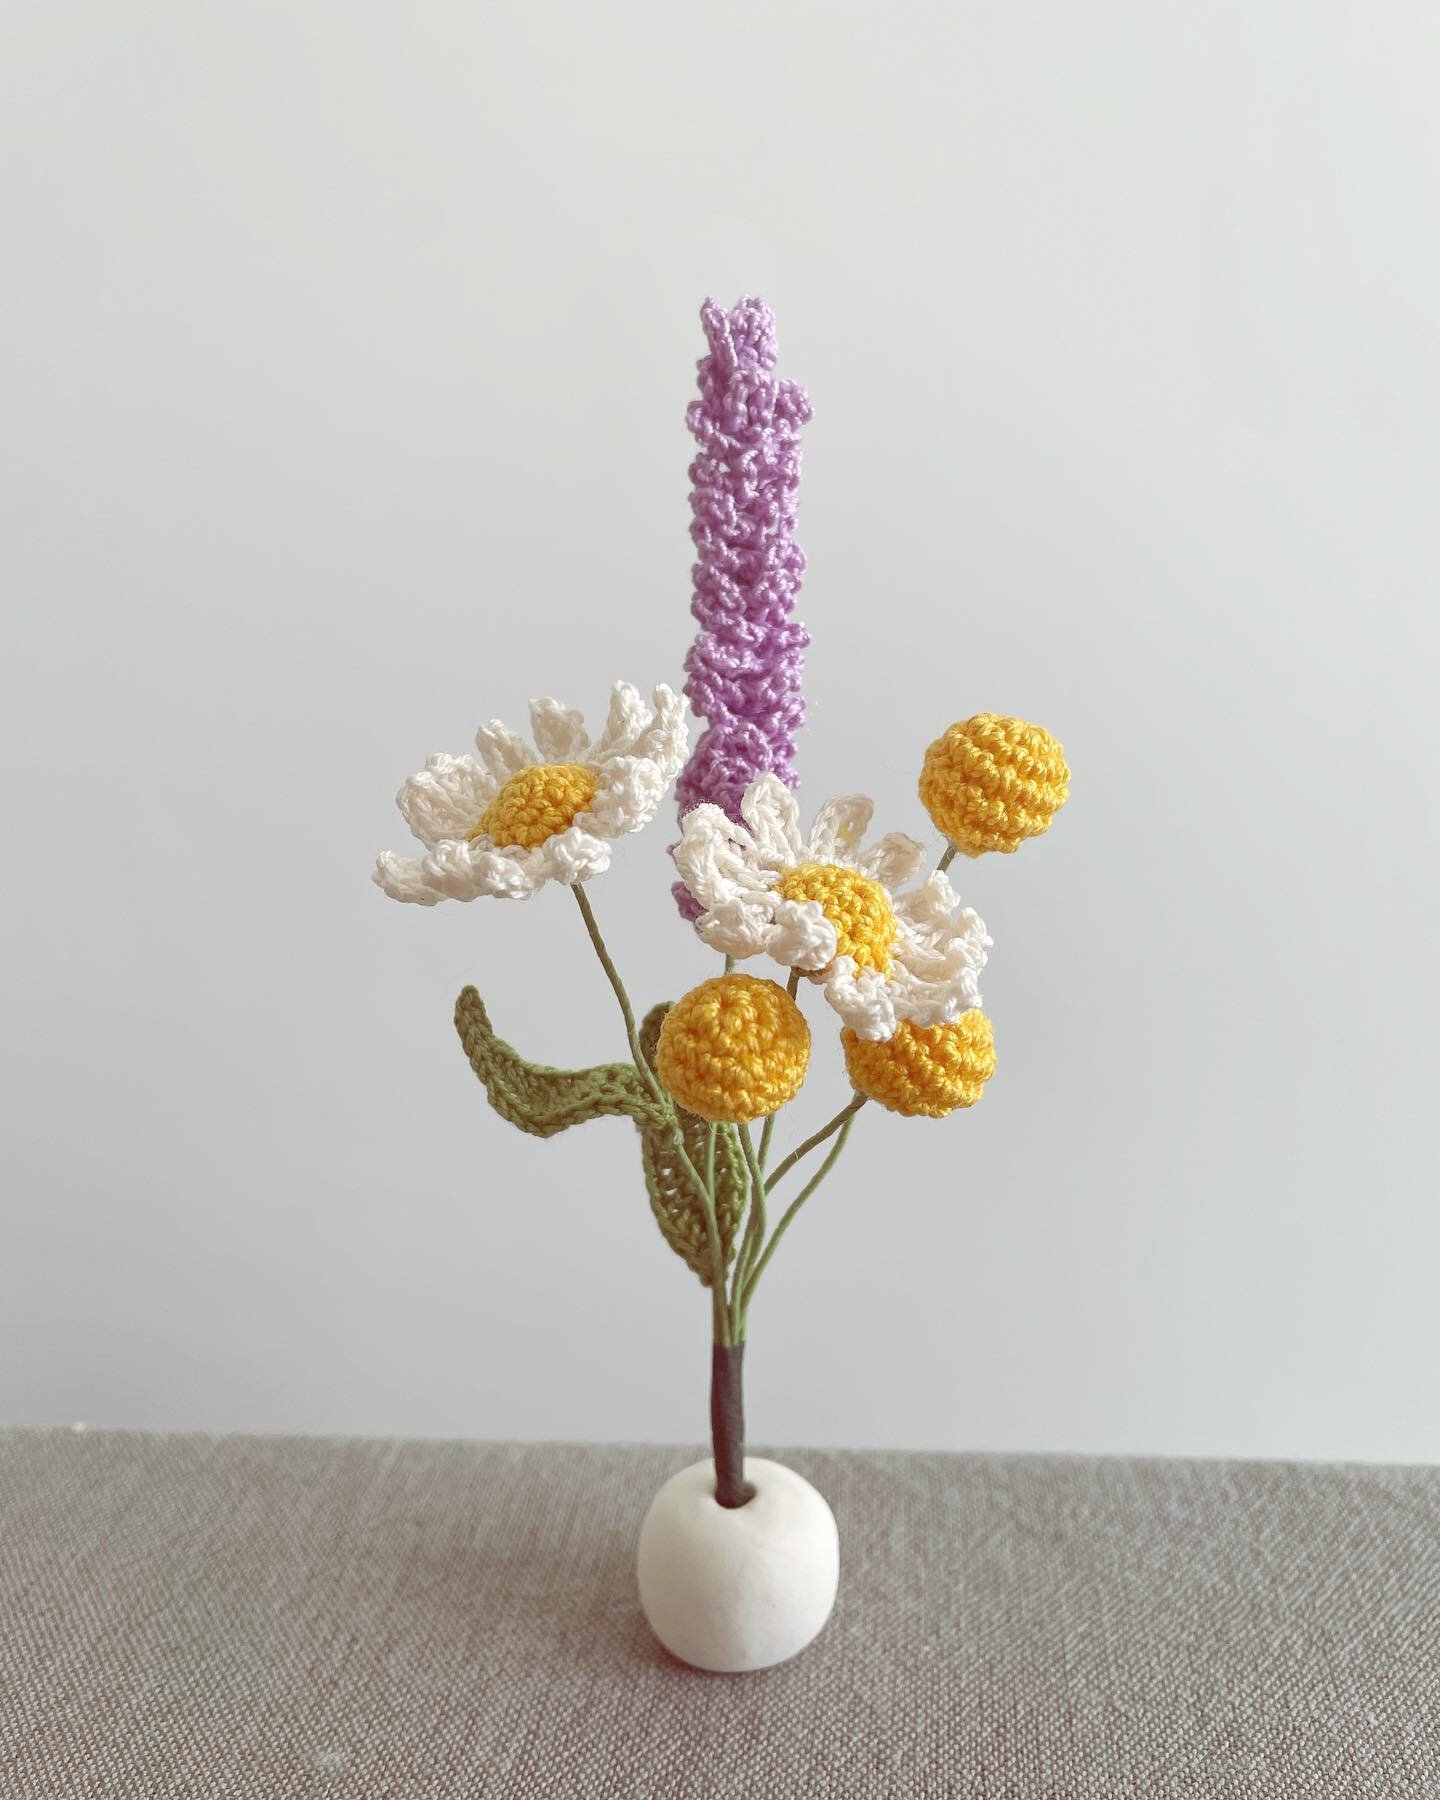 Happy Mother&rsquo;s Day! 
Tiny bouquets. 
I made a tiny vase for the tiny bouquets. Very simple and light. I&rsquo;m really enjoying making these different bouquets. I get to play around with a variety of flowers.
. 
.
.
.
.
.
.
#crochet#crochetflow